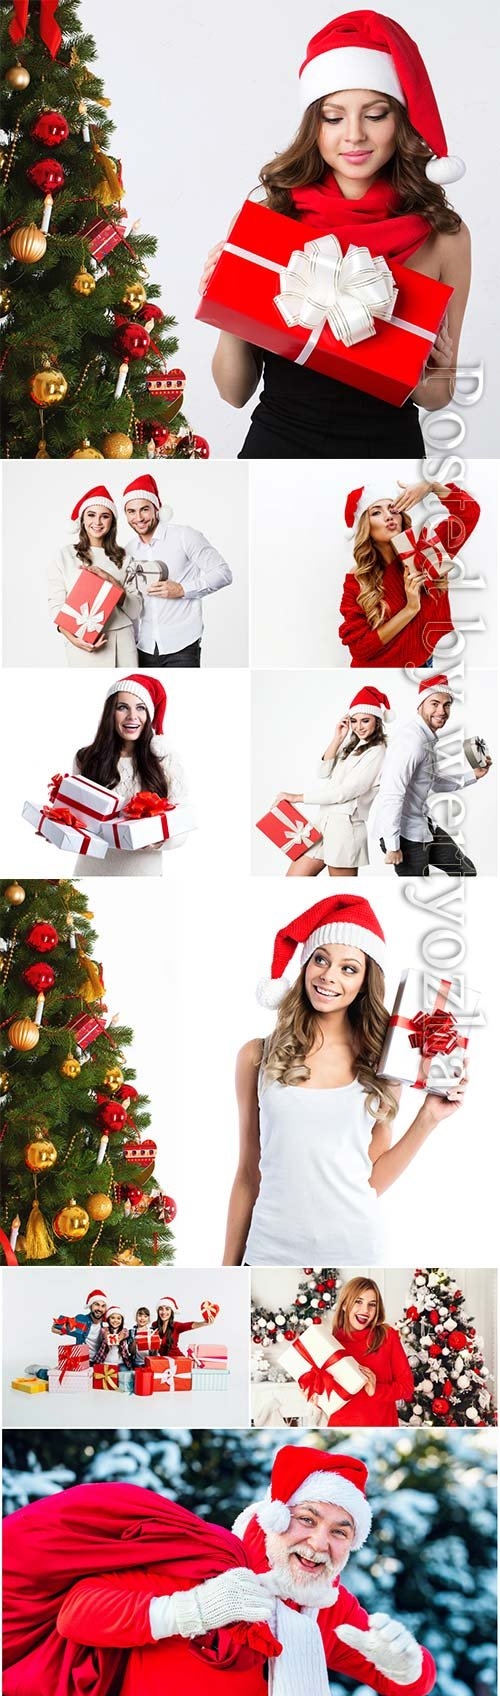 Christmas and New Year stock photo collection